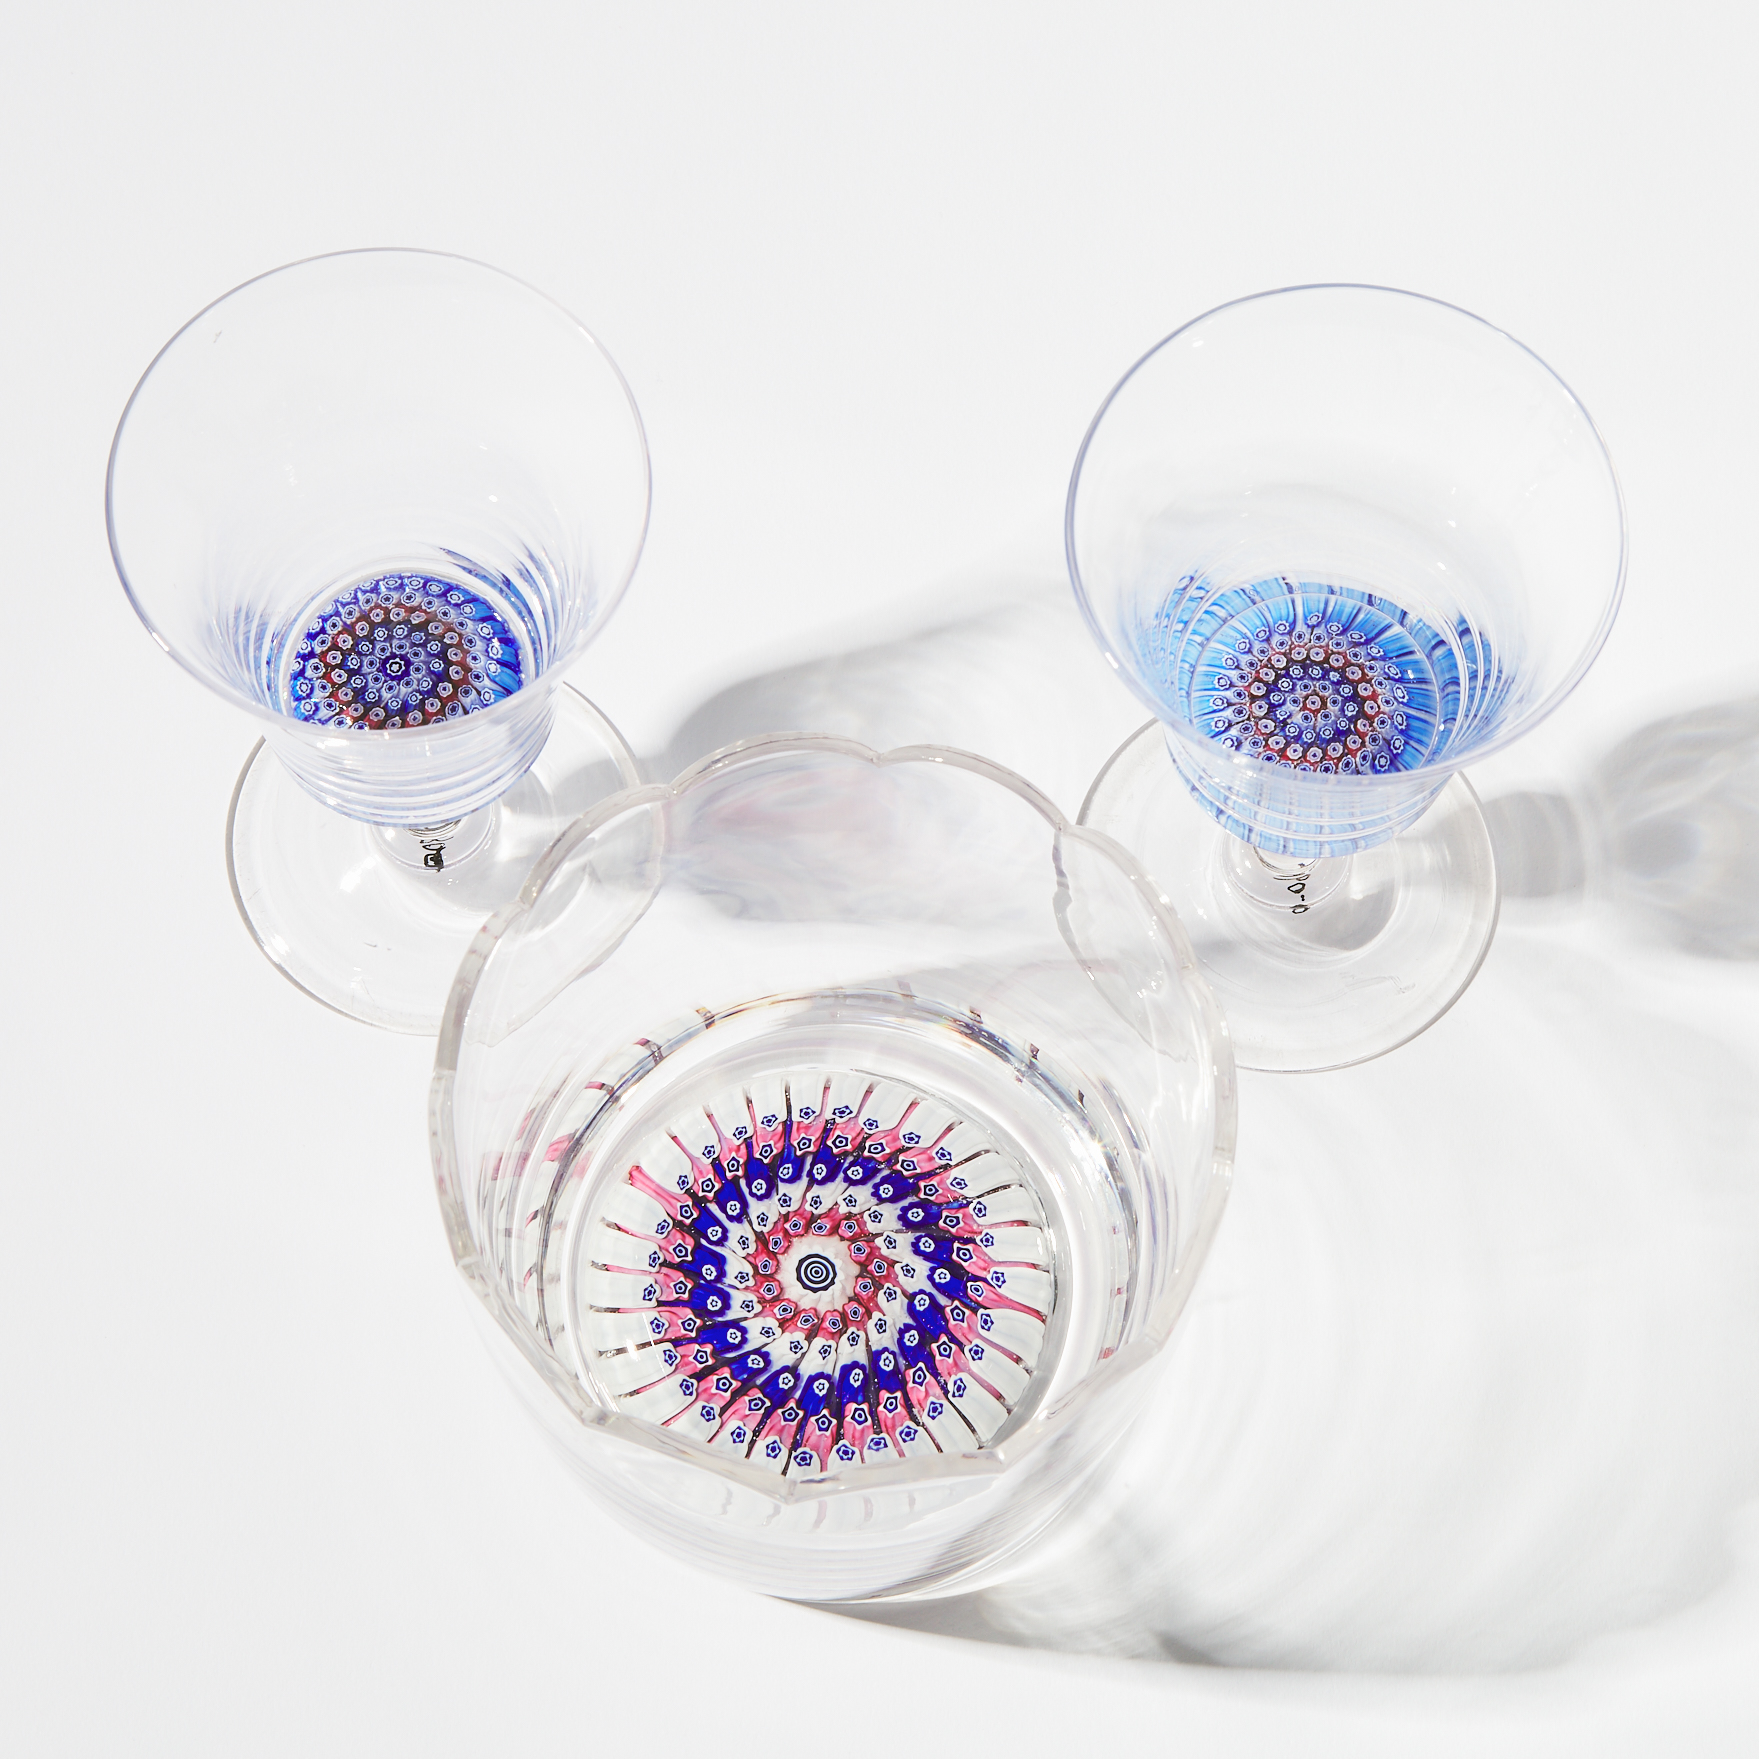 Pair of Whitefriars Concentric Millefiori Glass Goblets and Scalloped Edge Bowl, 20th century